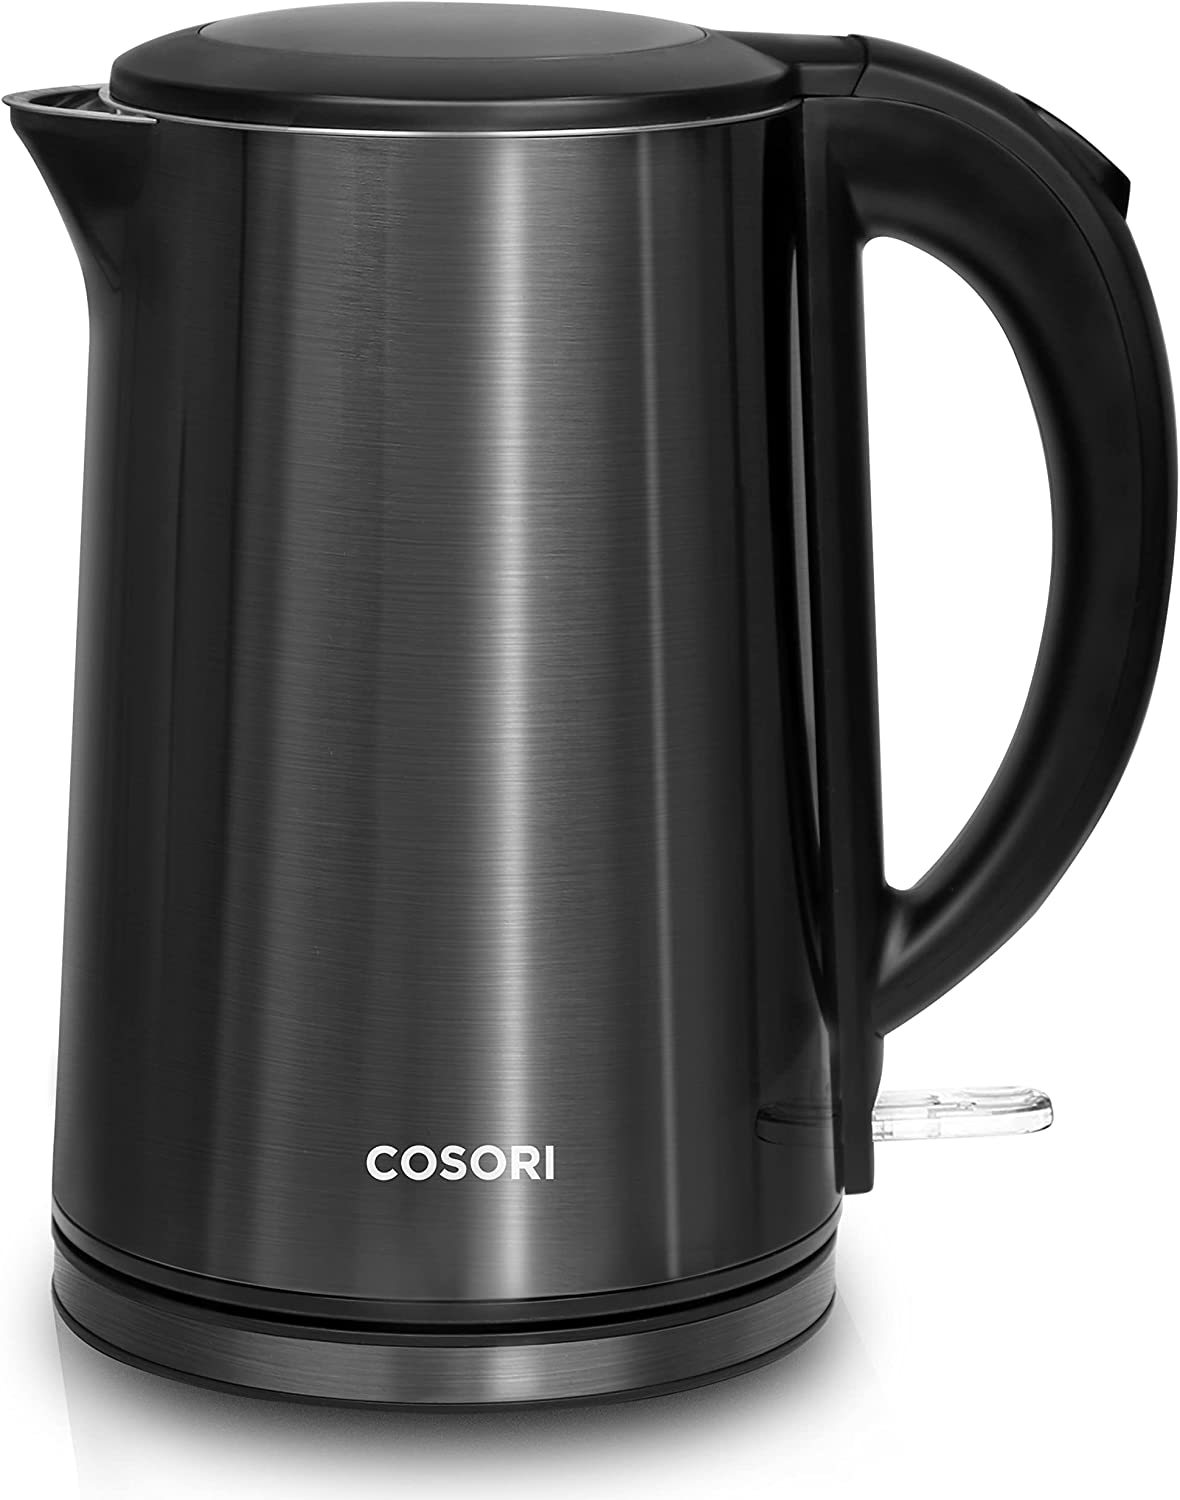 https://discounttoday.net/wp-content/uploads/2023/01/COSORI-Electric-Kettle-Stainless-Steel-with-Double-Wall-Wide-Open-Lid-1.5L-Electric-Tea-Kettle-BPA-Free-Water-Kettle-Hot-Water-Boiler-for-Boiling-Water-Auto-Shut-Off-Boil-Dry-Protection-Black.jpg